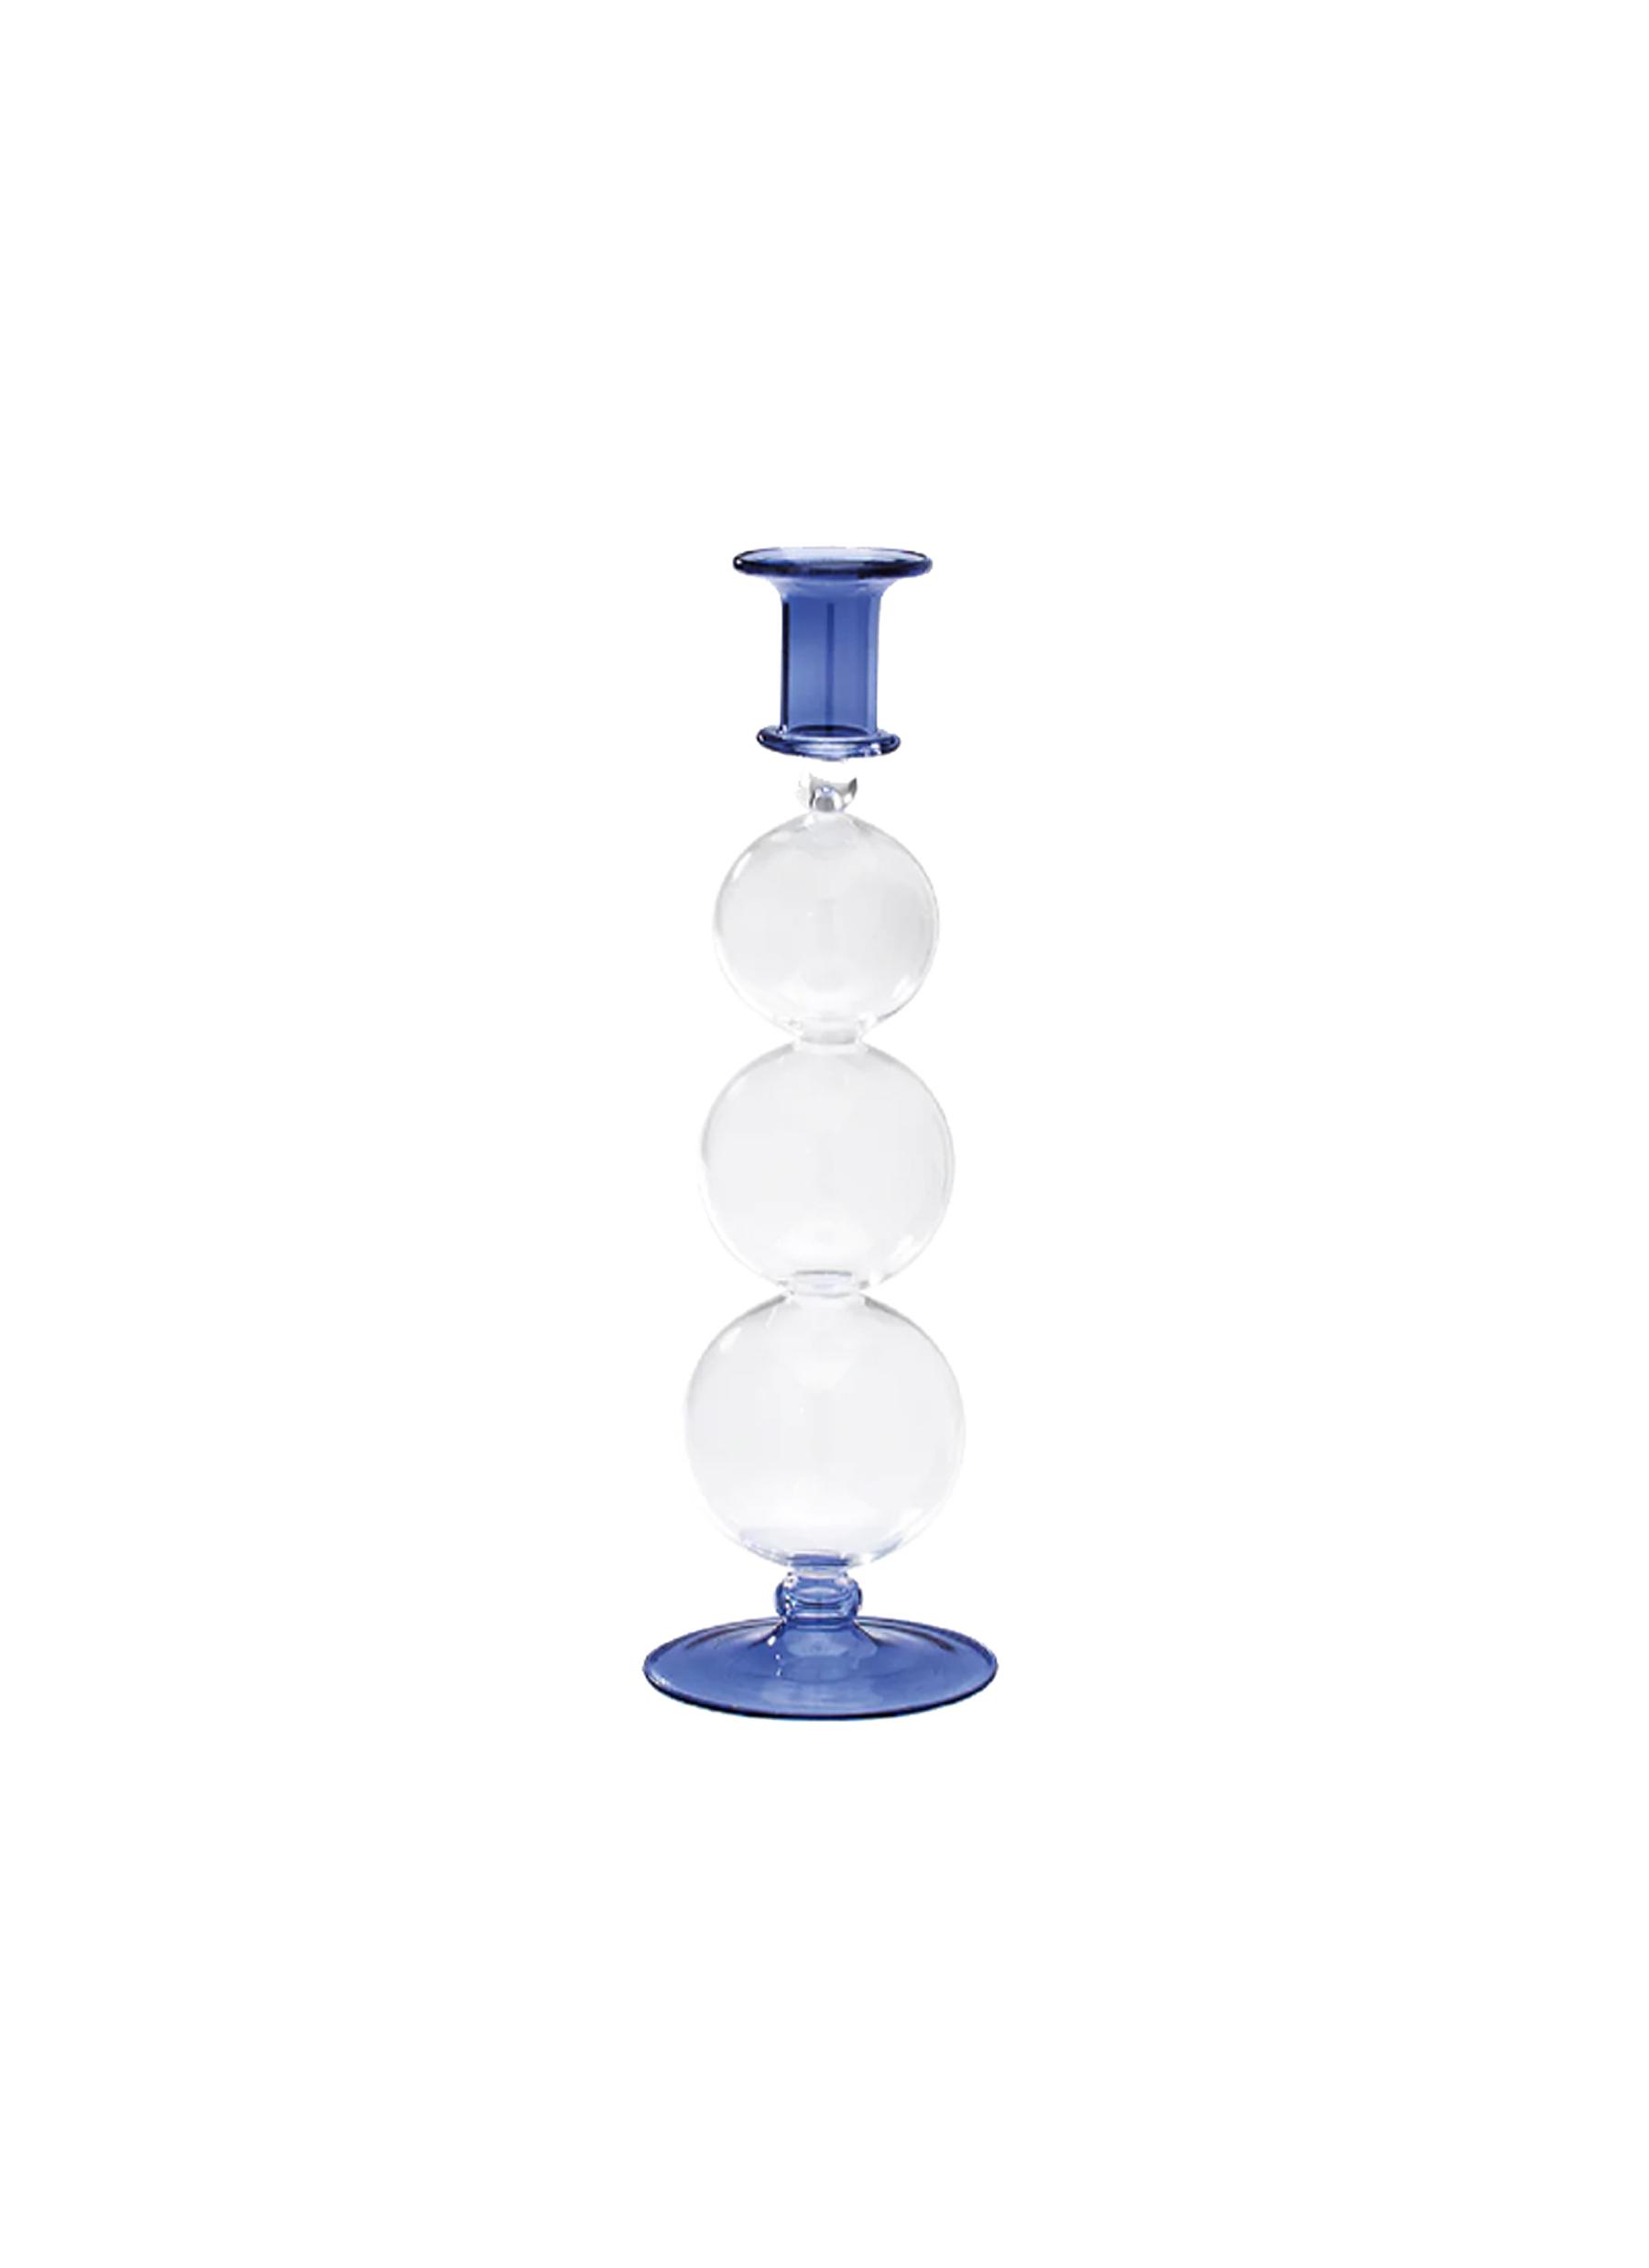 BUBBLE GLASS CANDLE HOLDER - NAVY BLUE